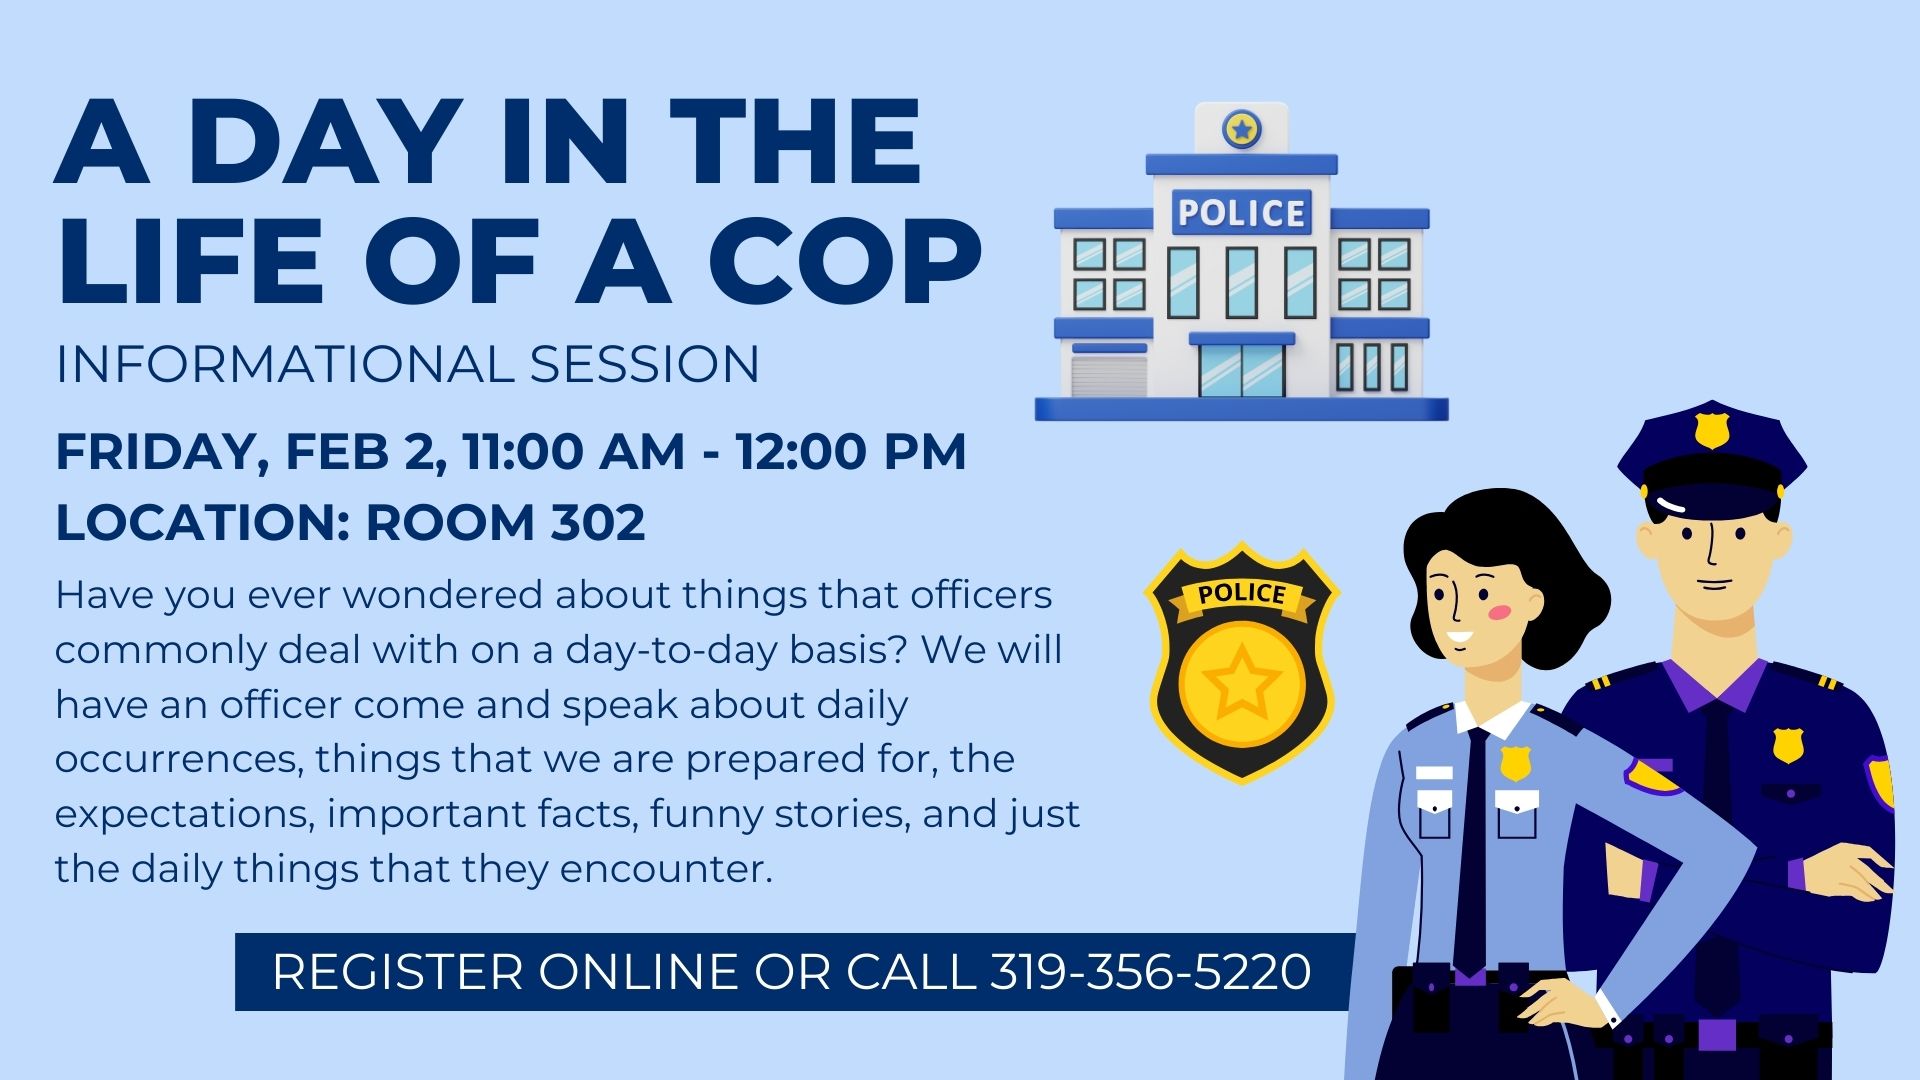 A Day in the Life of a Cop